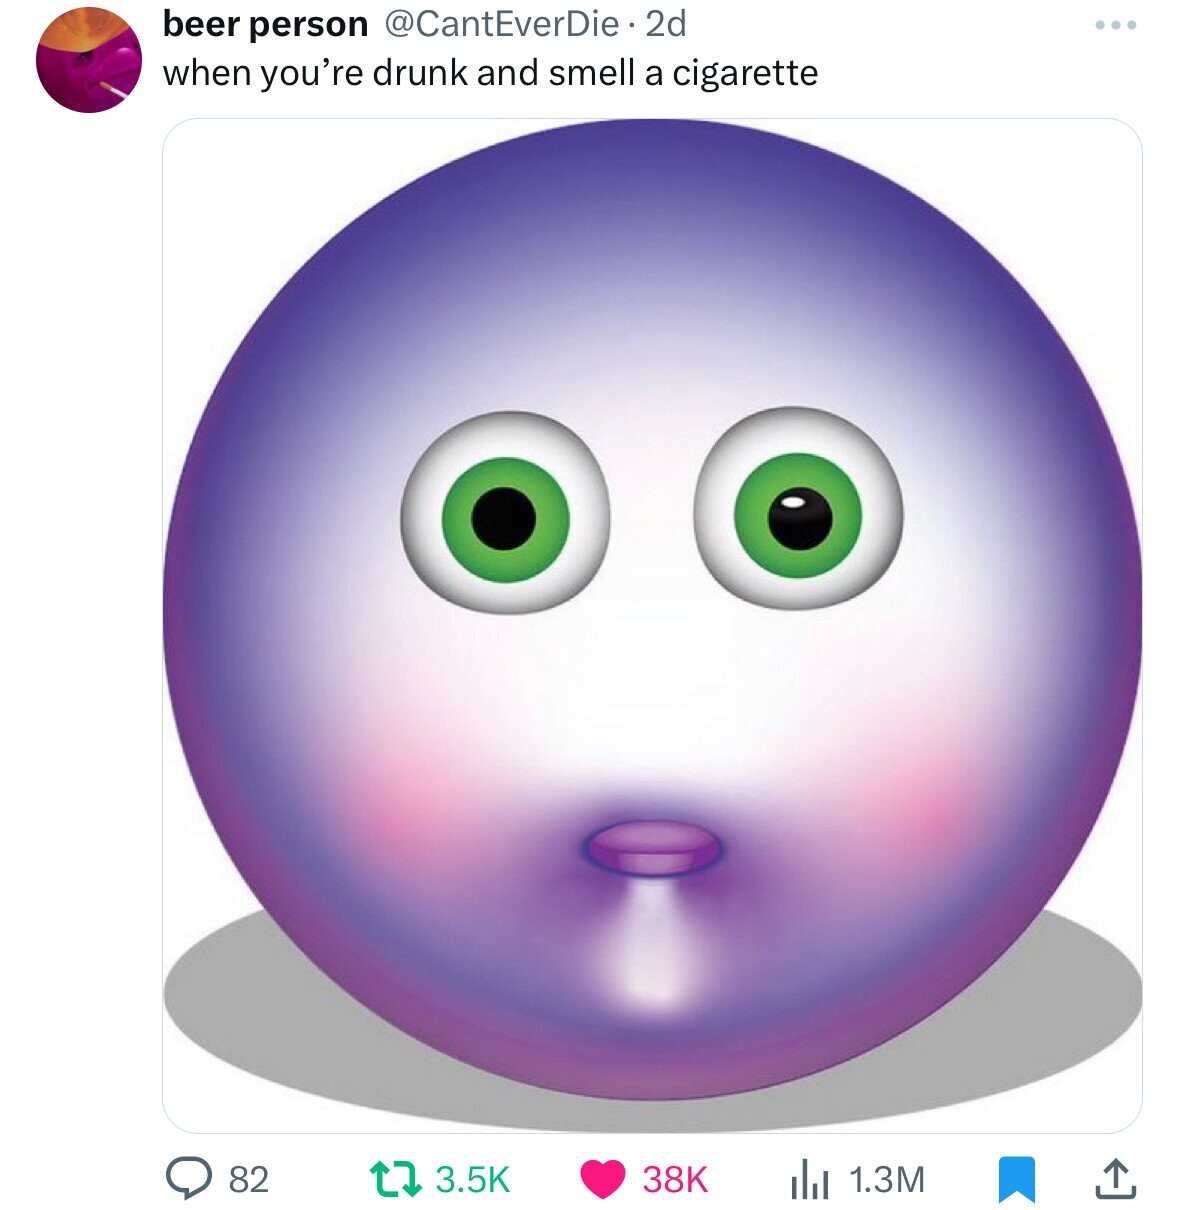 cant breath emoji - beer person 2d when you're drunk and smell a cigarette 32 82 17 38K ili 1.3M